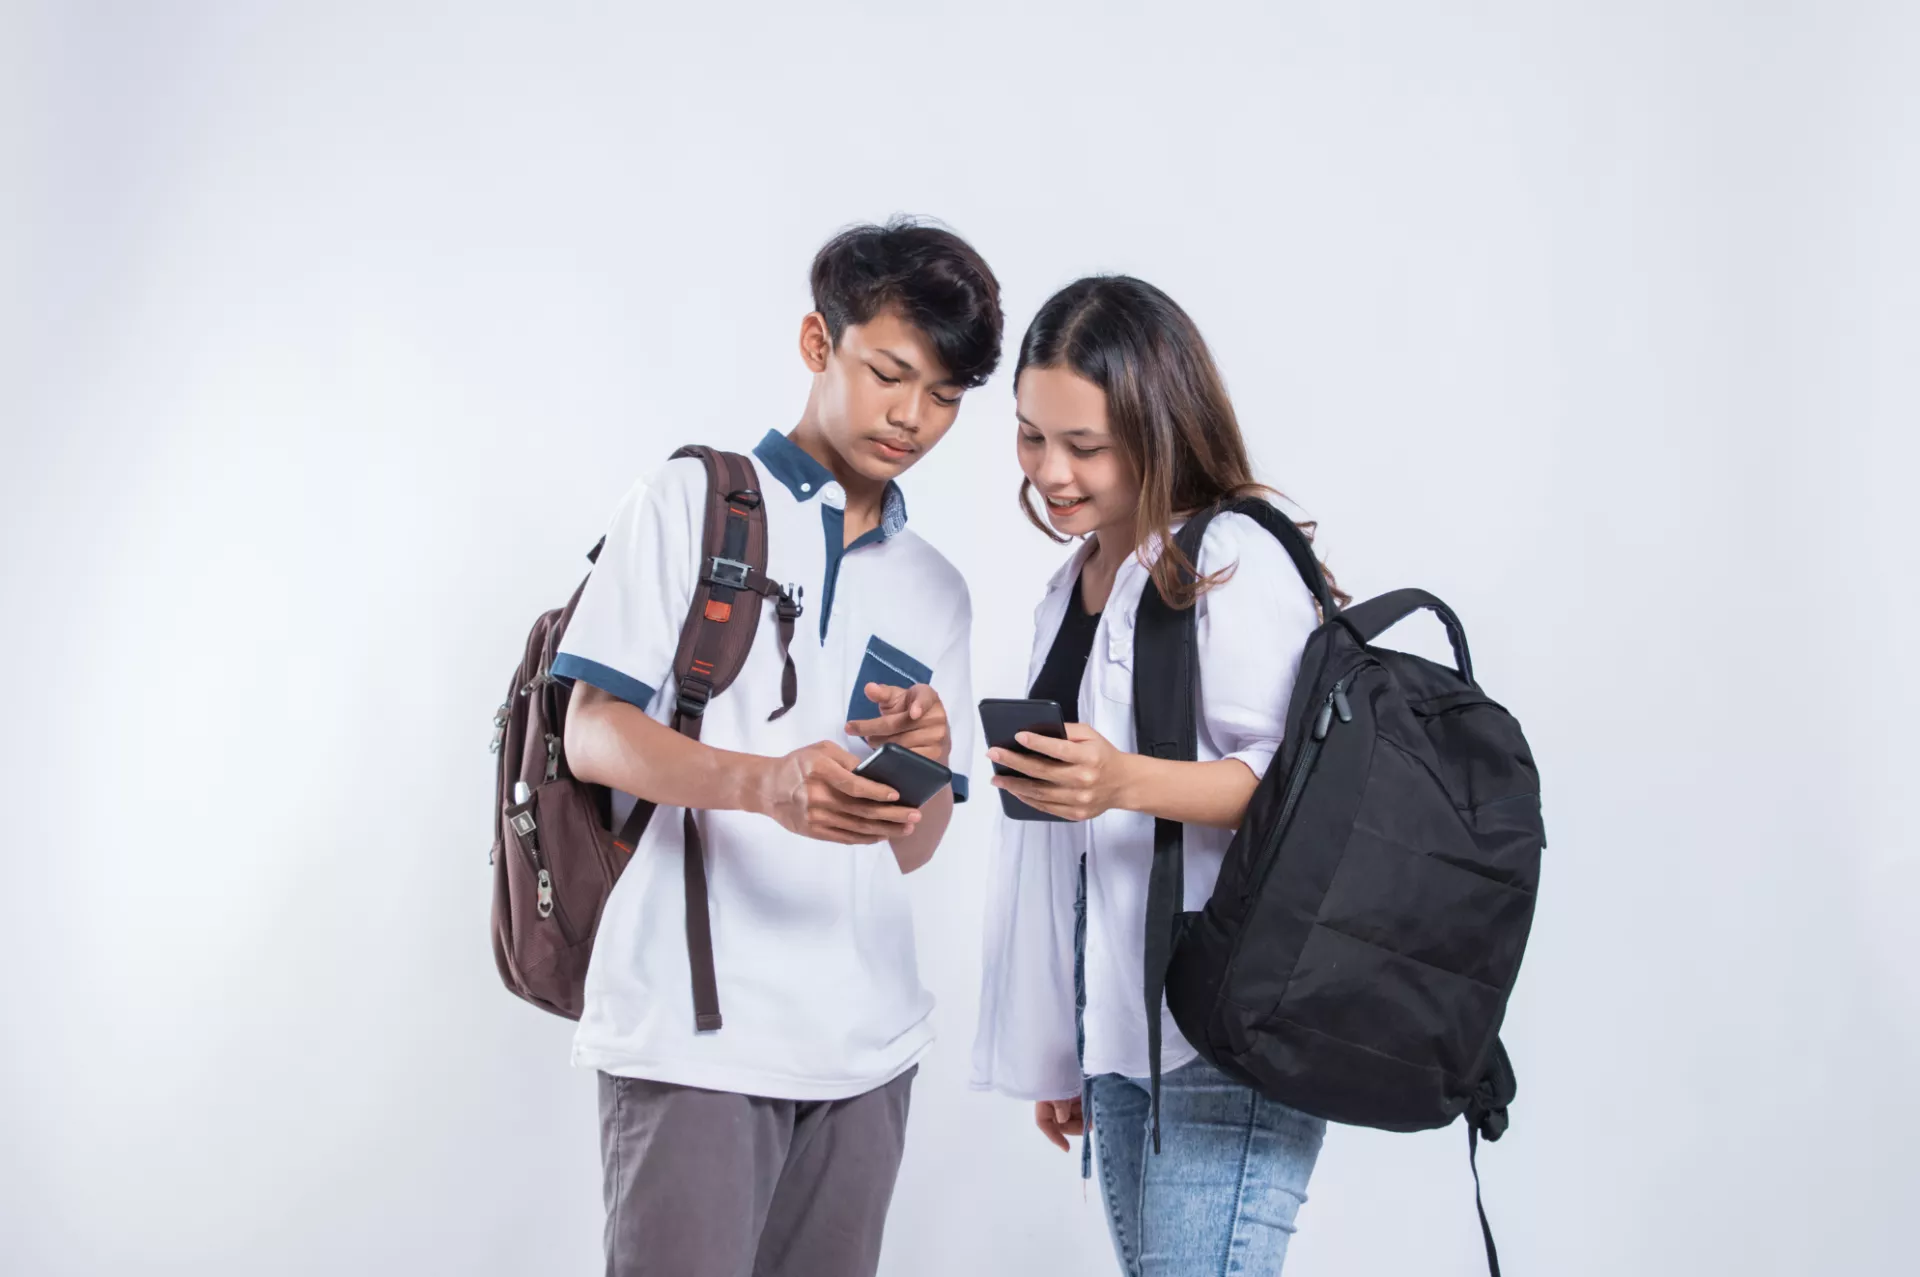 Two youth looking at their phones with the words "Contact Us" above.